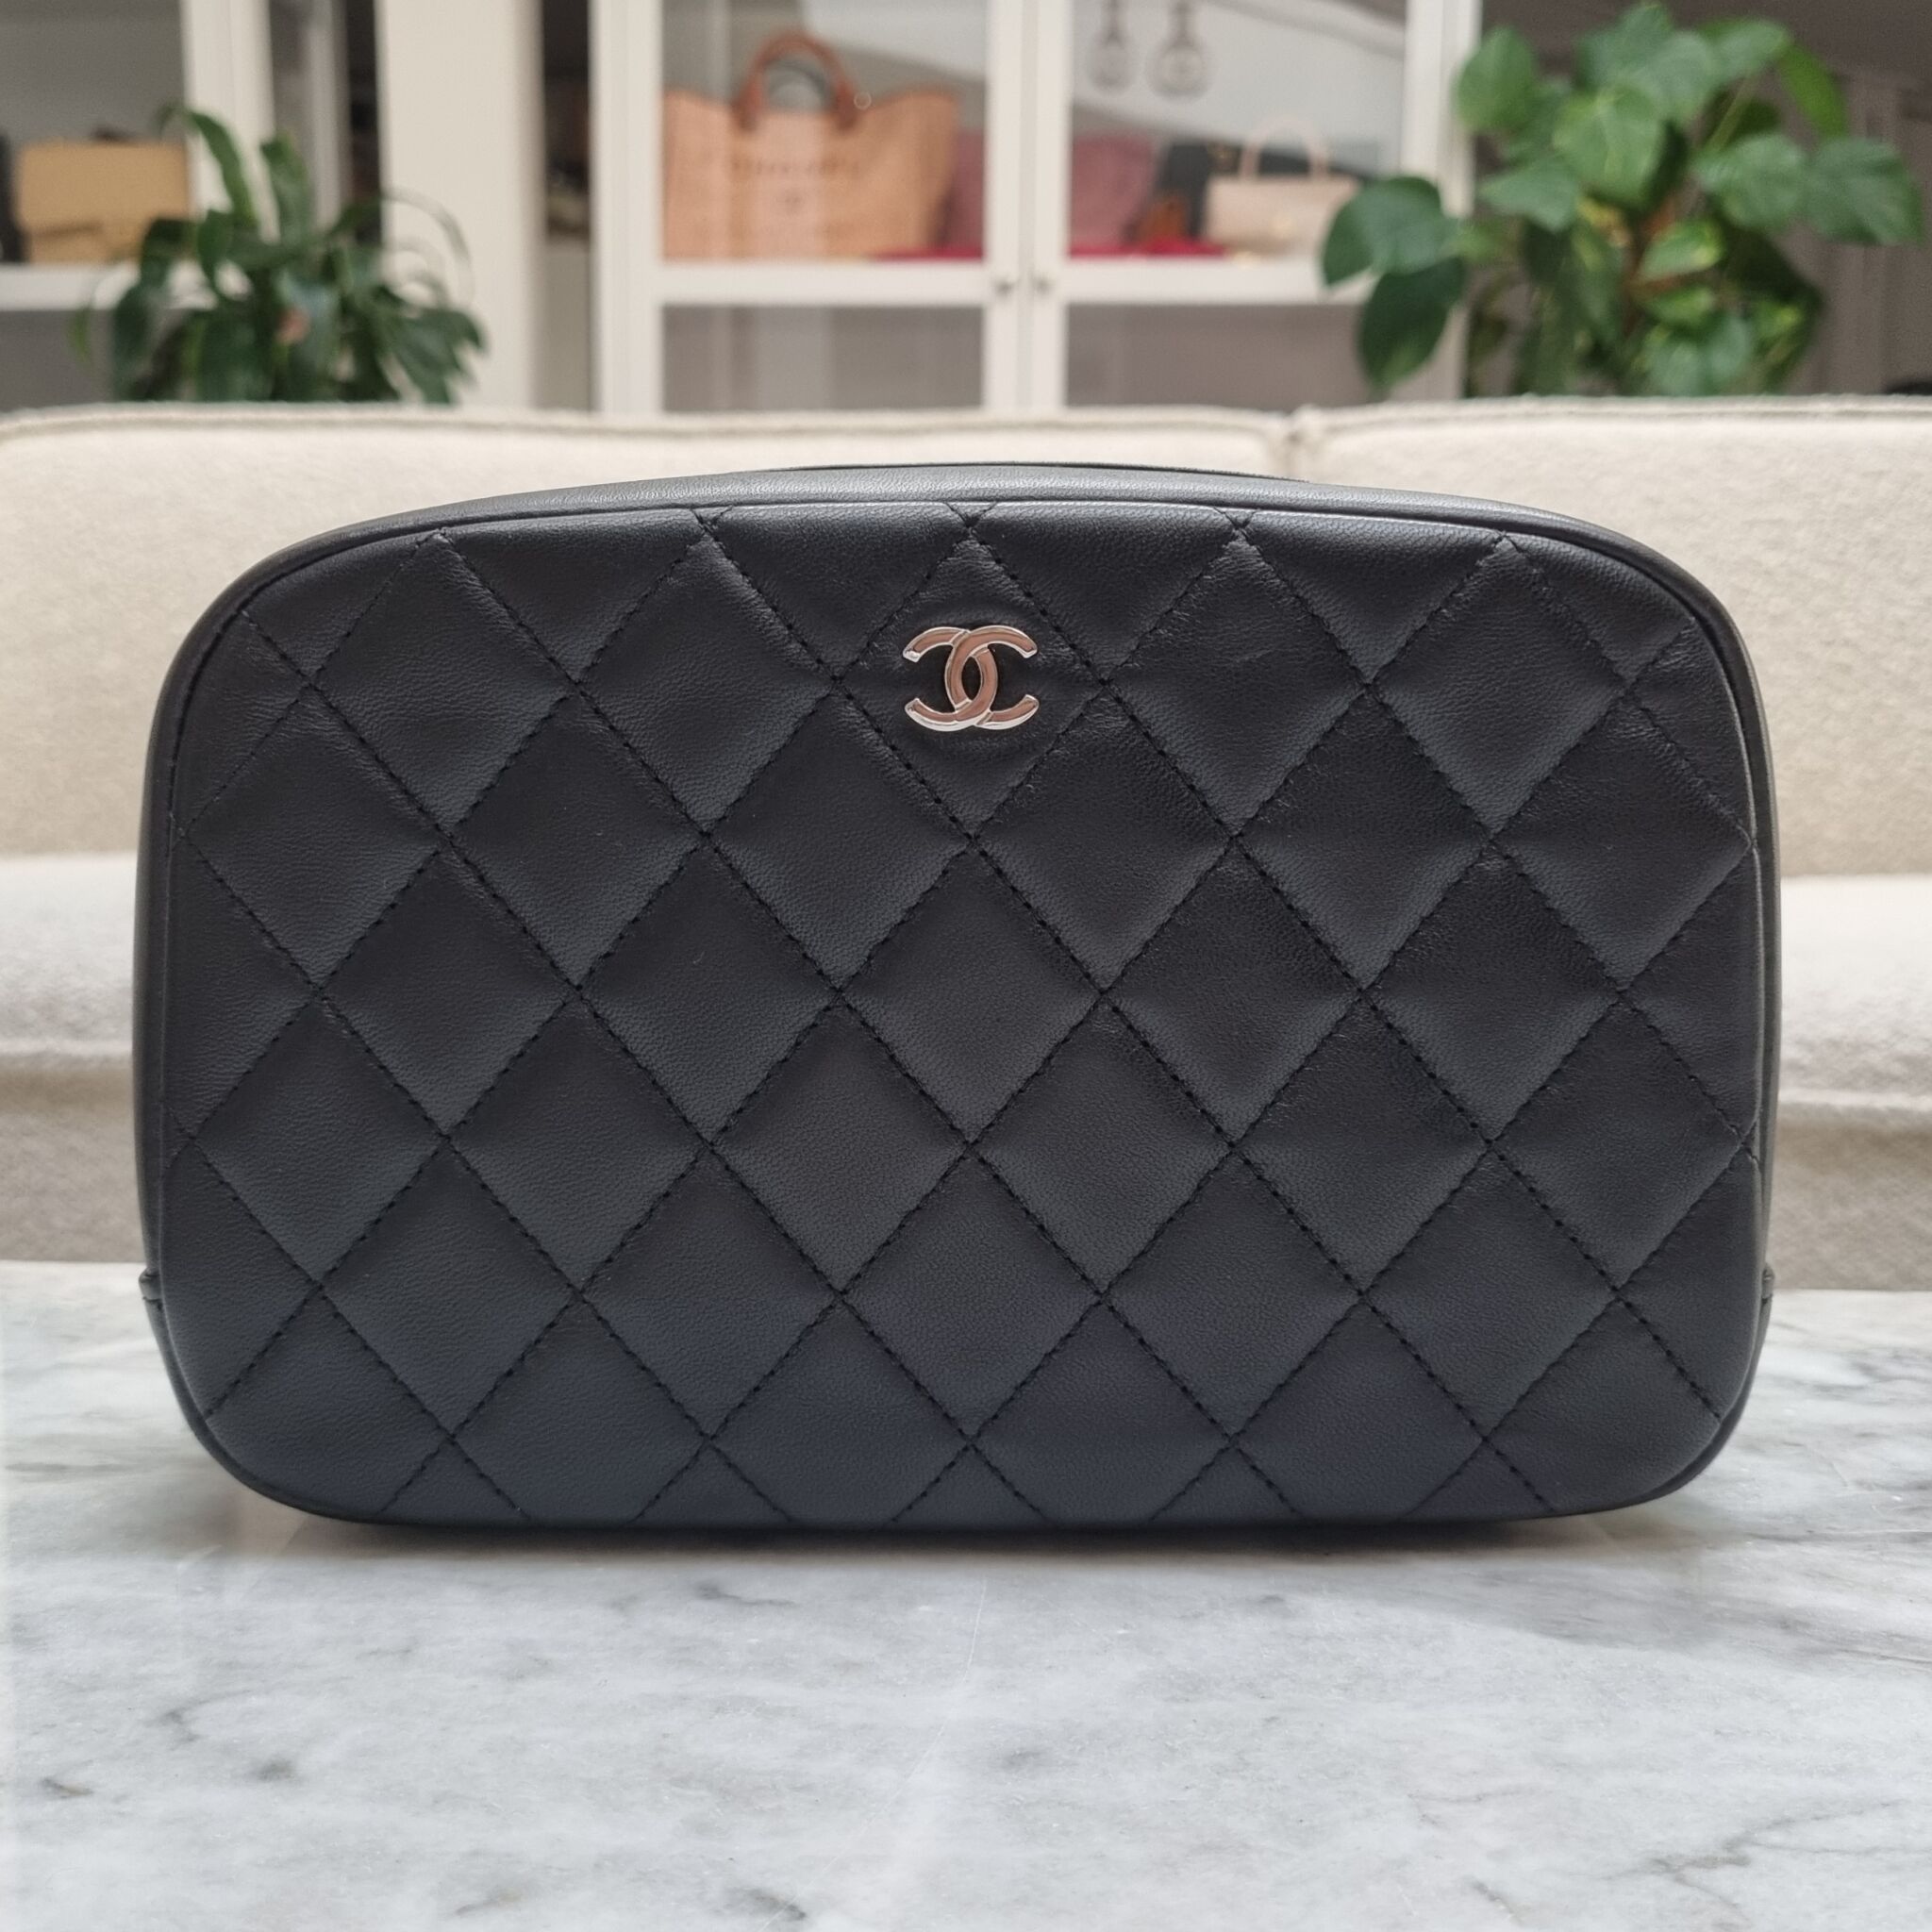 Chanel Large Cosmetic Pouch, Lambskin, Black SHW - Laulay